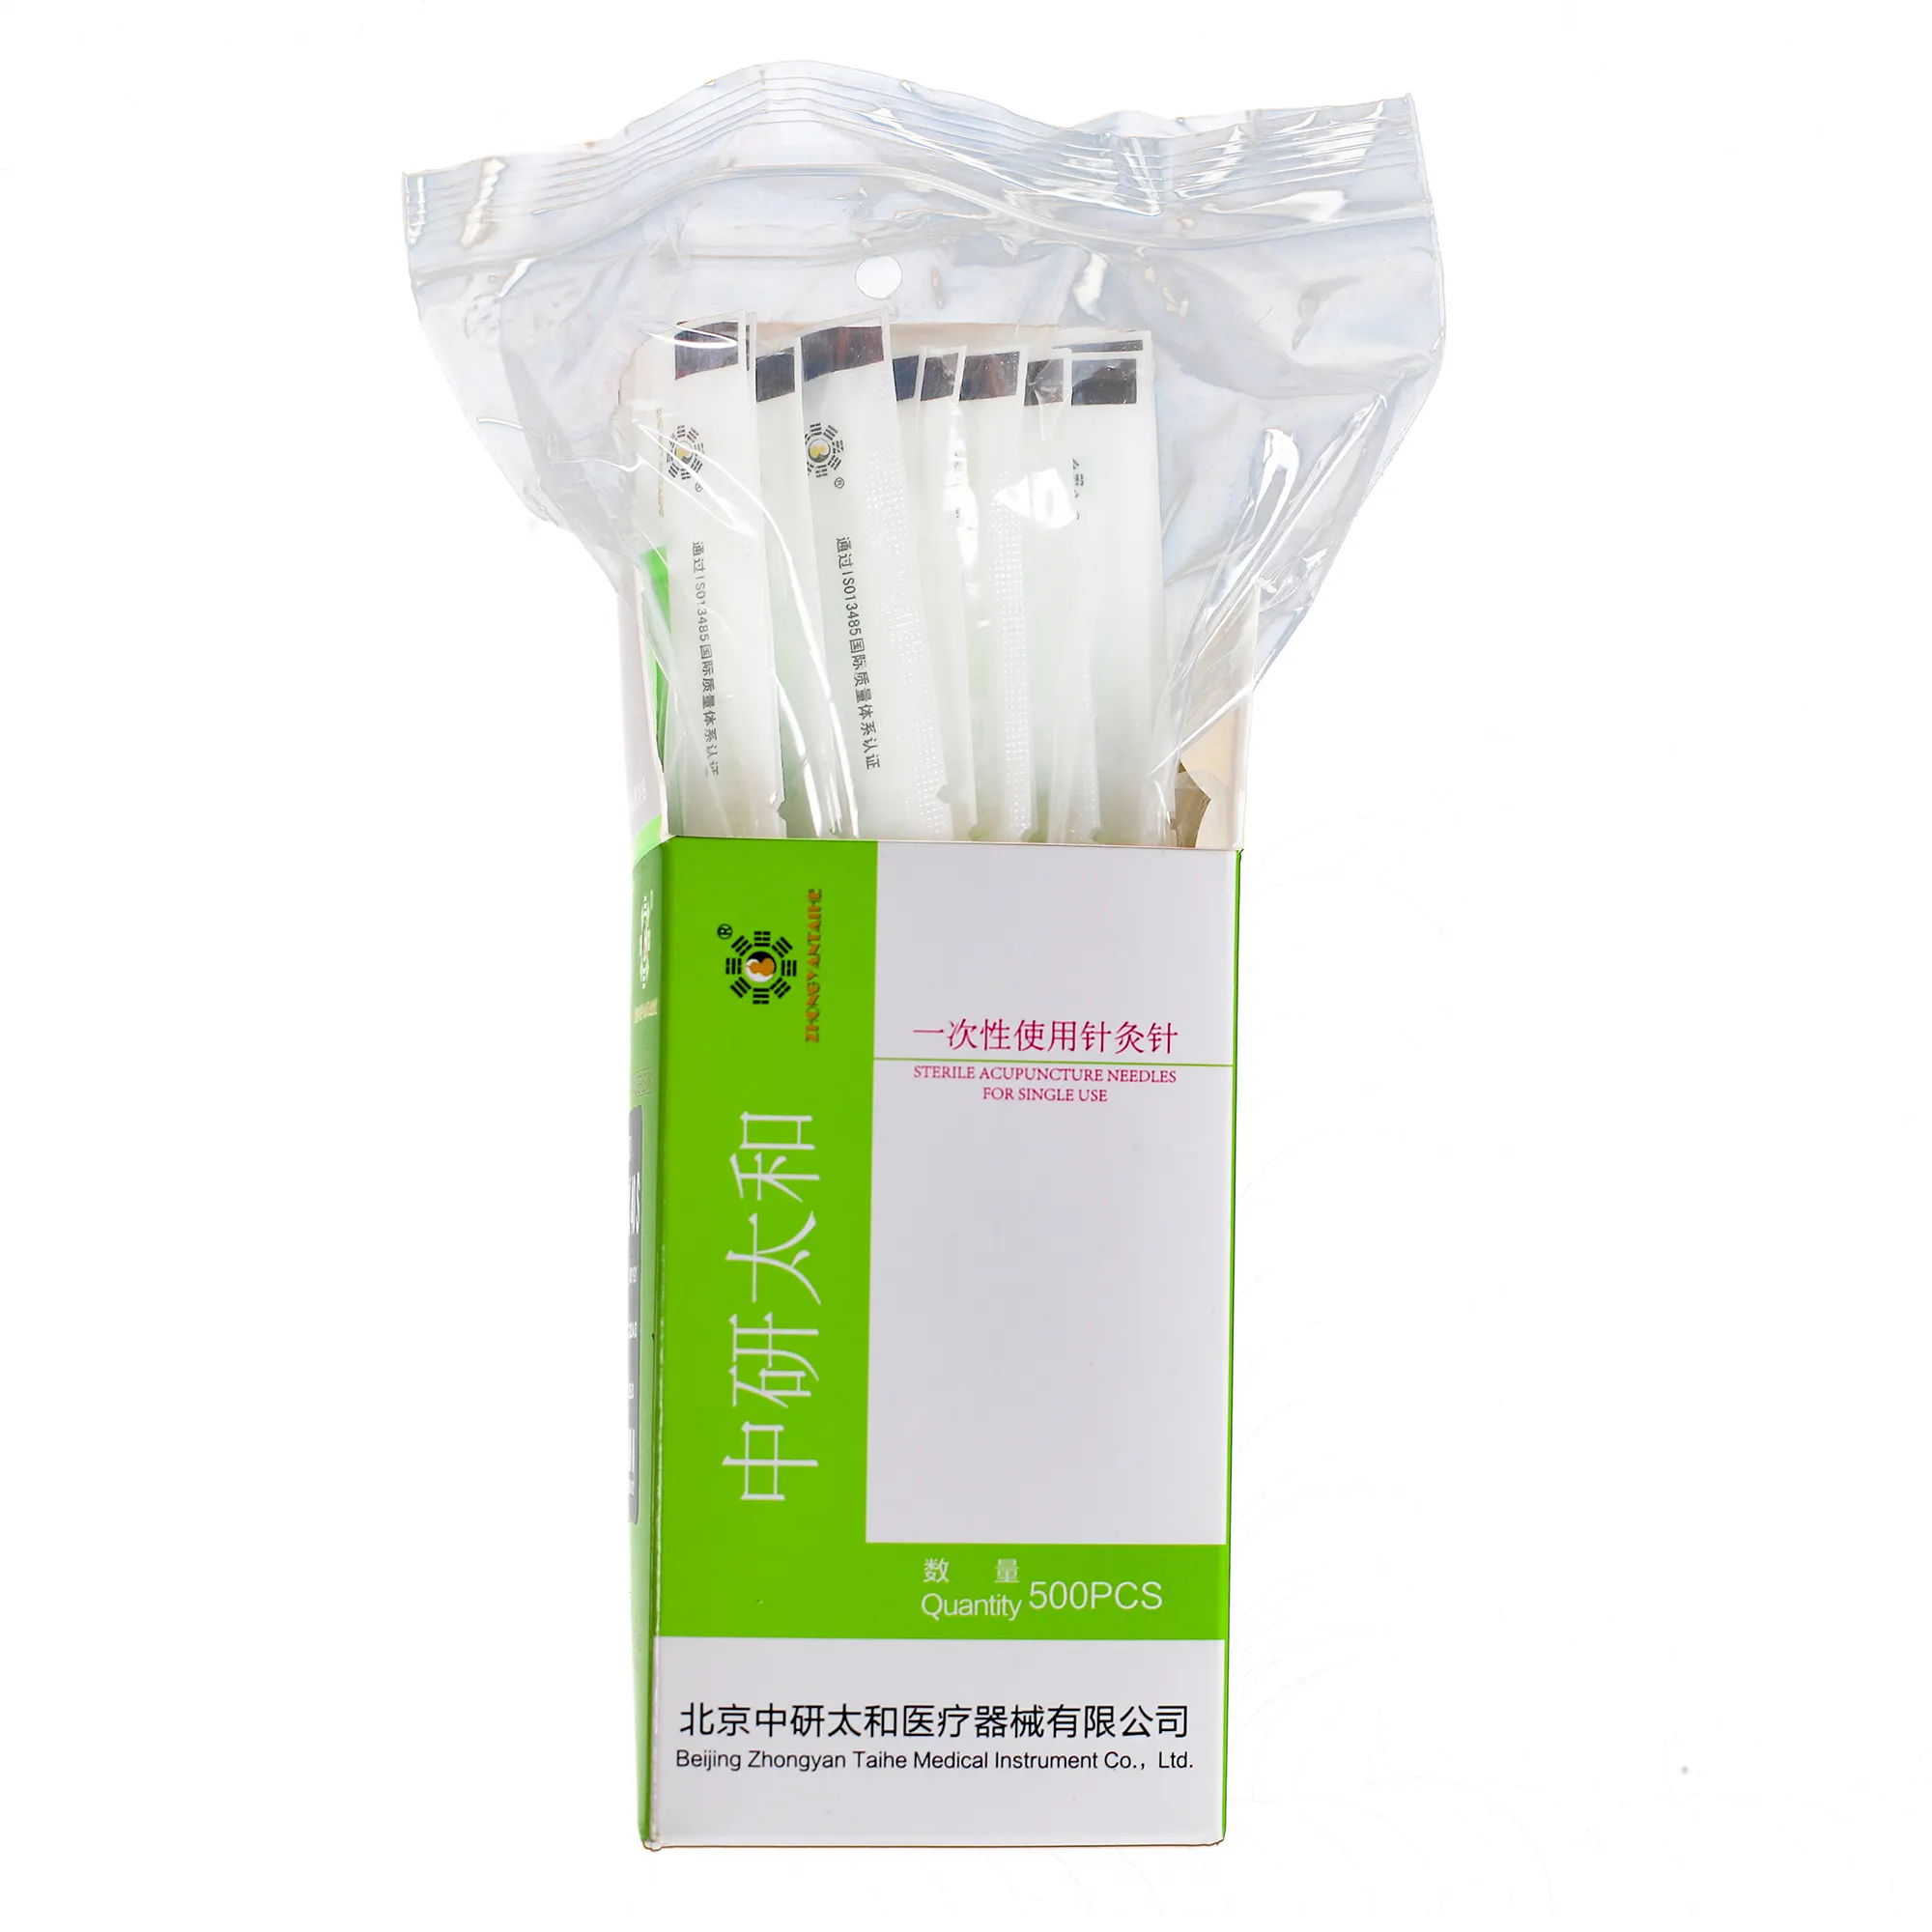 Acupuncture Needle 500pieces/box Zhongyan Taihe Disposable Needle 0.25*25cm